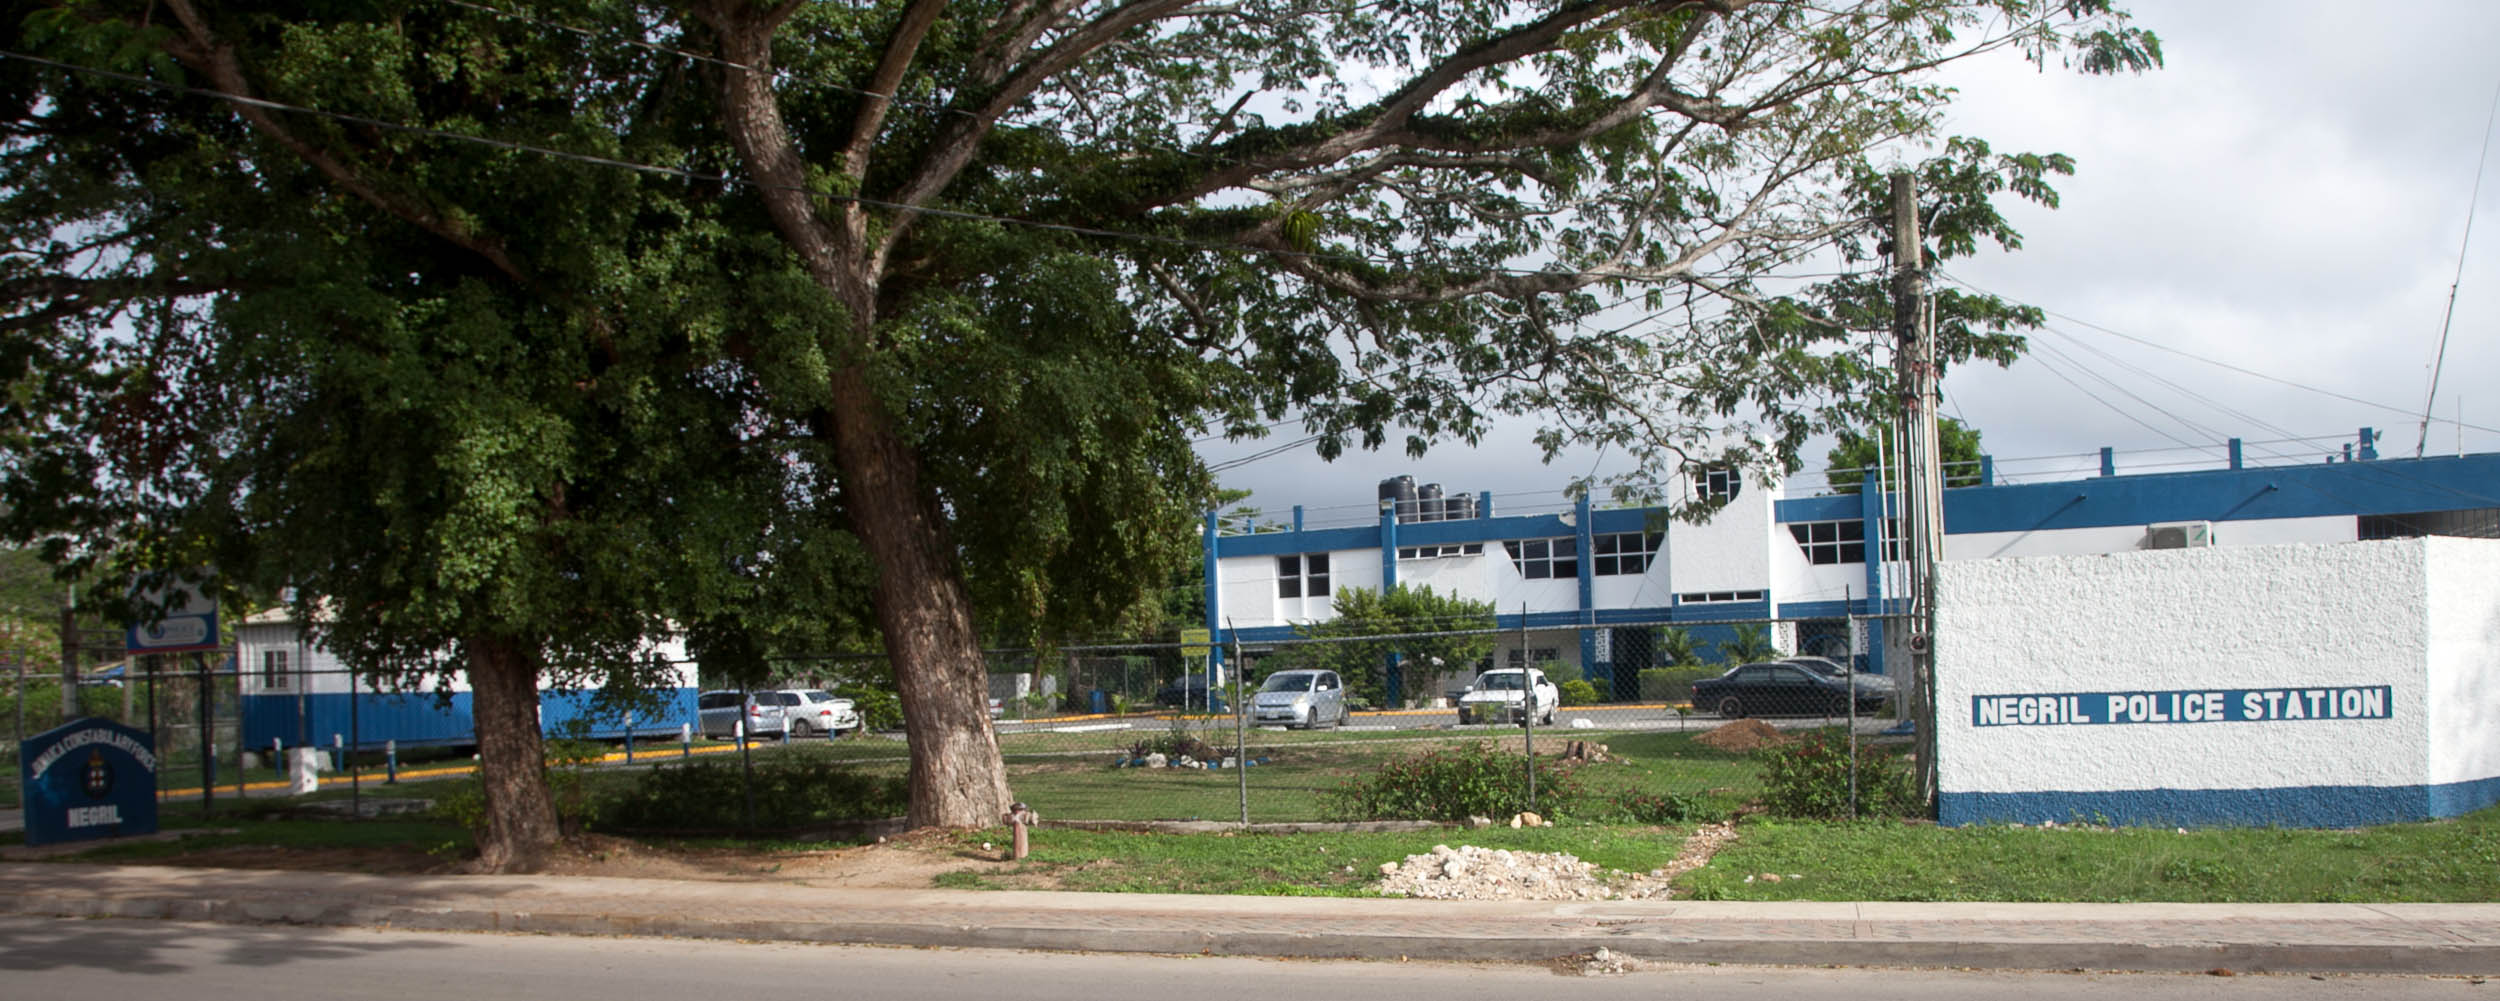 Negril Police Station, Negril Jamaica